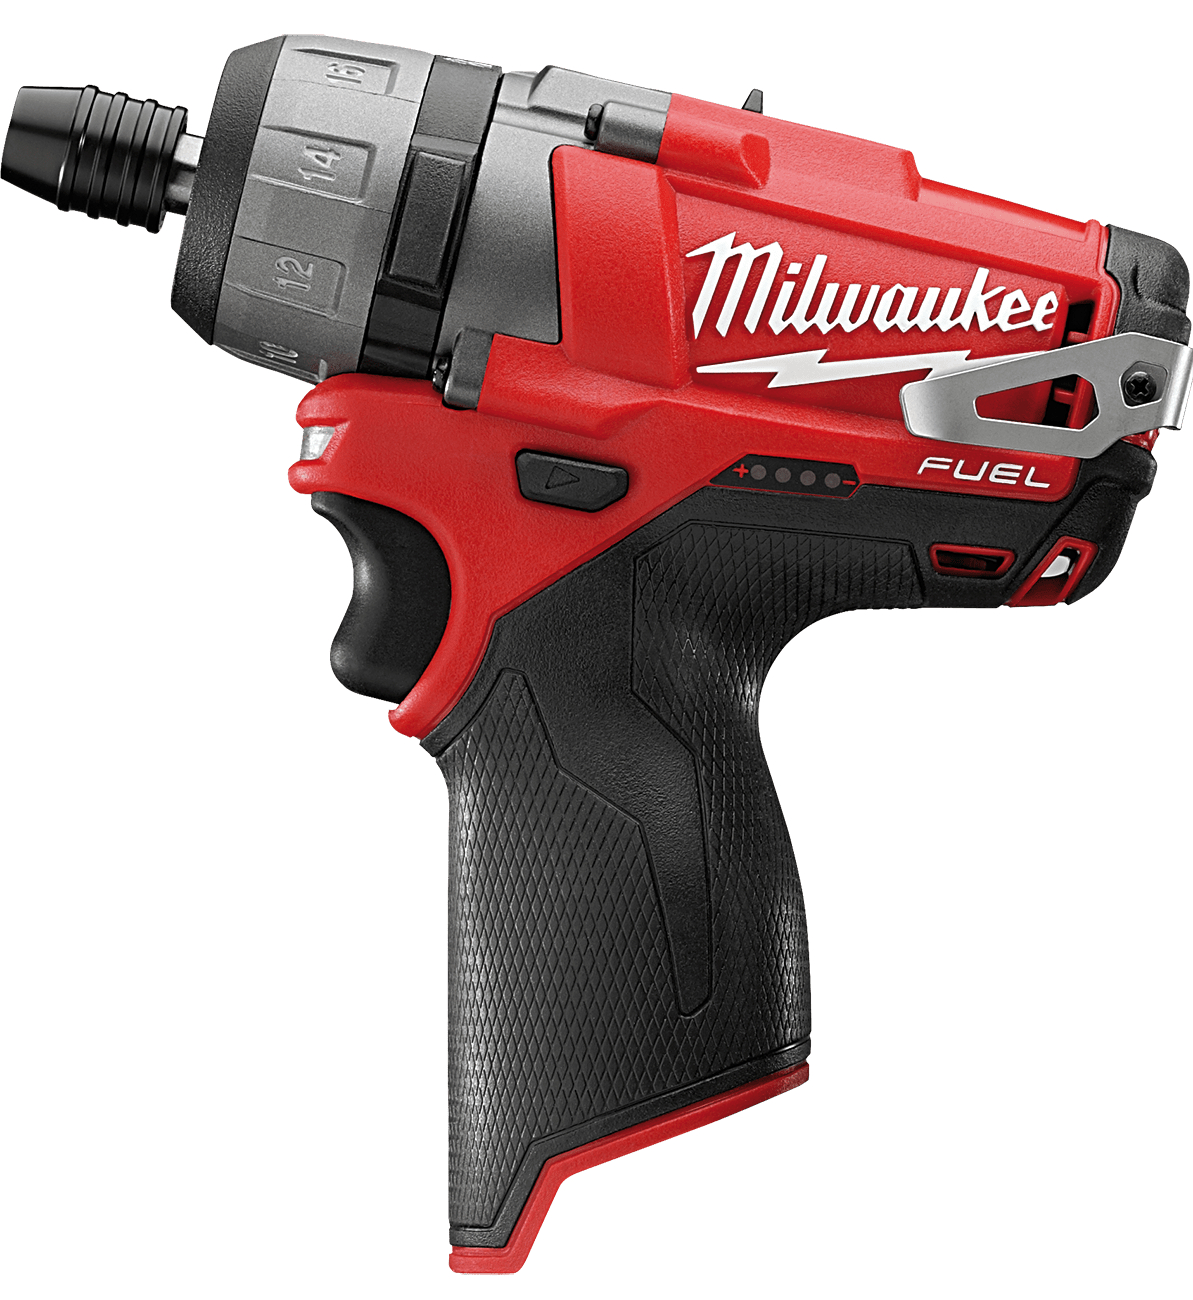 MILWAUKEE M12 CD-0 FUEL cordless two-speed screwdriver